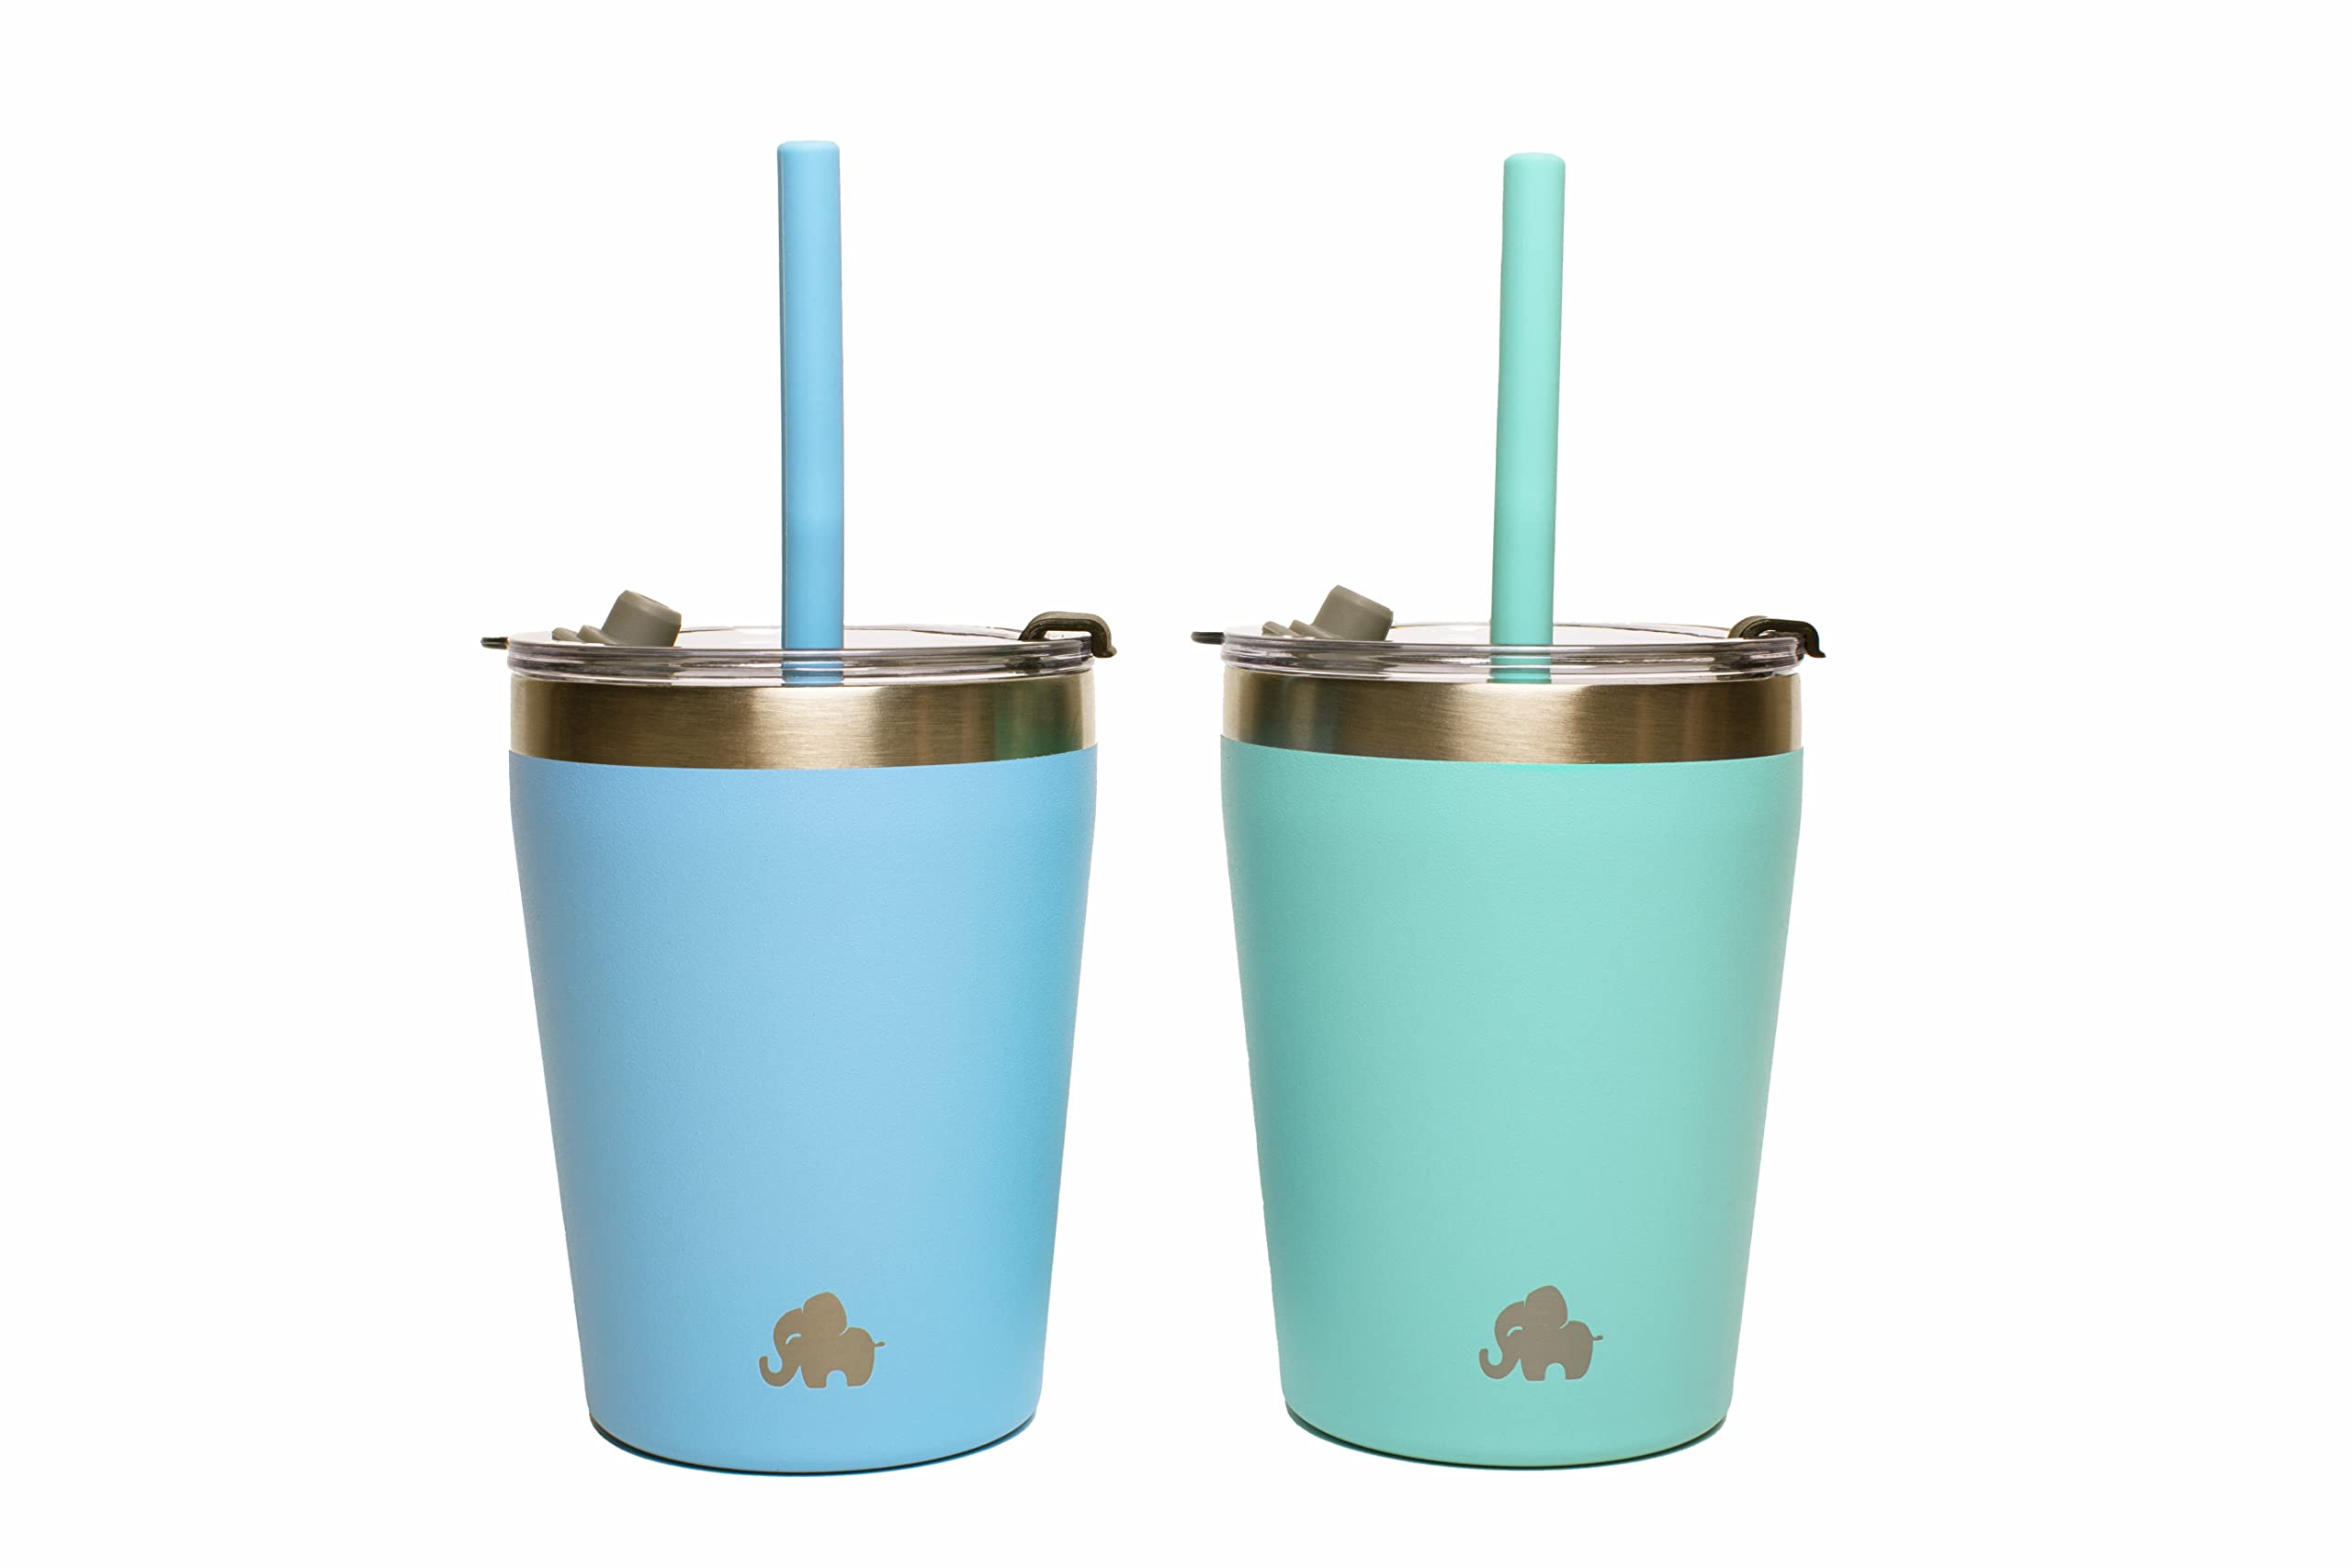 ELEFANT Kids & Toddler Cups (SET of 2), Stackable Stainless Steel Insulated Tumblers with BPA FREE Leak Proof Lids and Reusable Silicone Straws, Elegant, Powder Coated (BLUE + TURQUOISE)